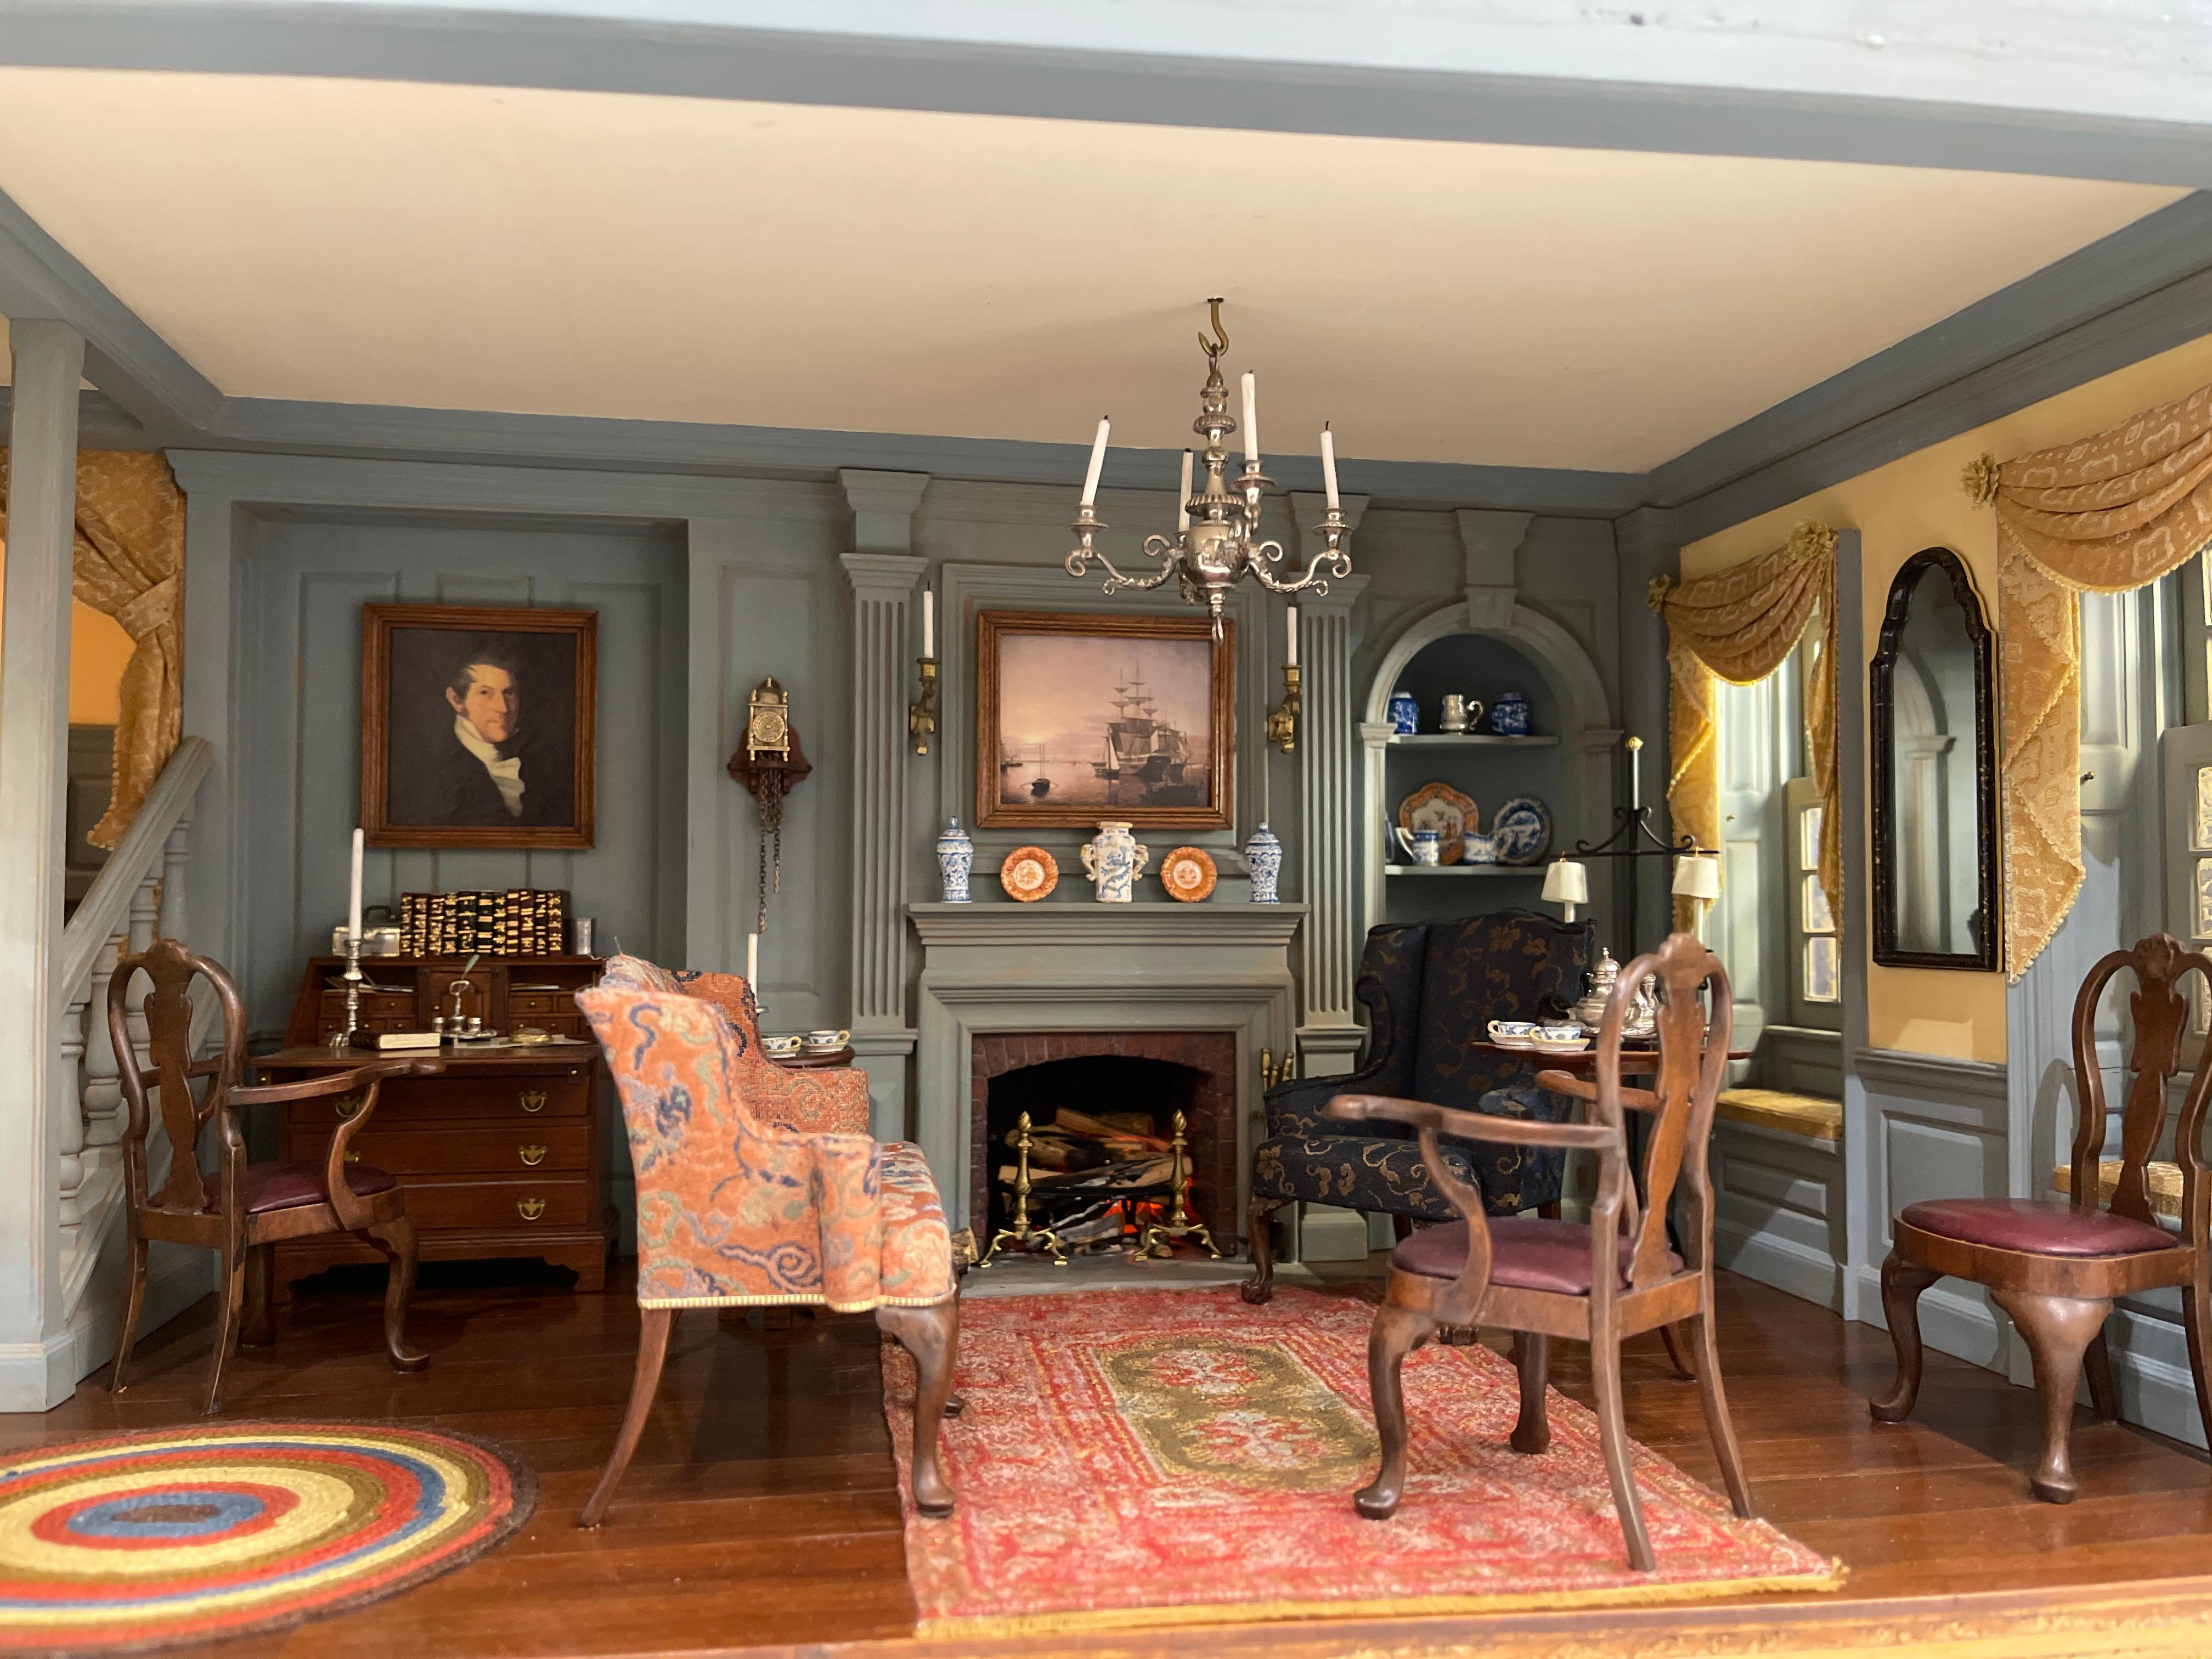 Late Colonial Sitting Room, Boston MA, 1760 - Miniature Room by Kupjack Studios For Sale 2